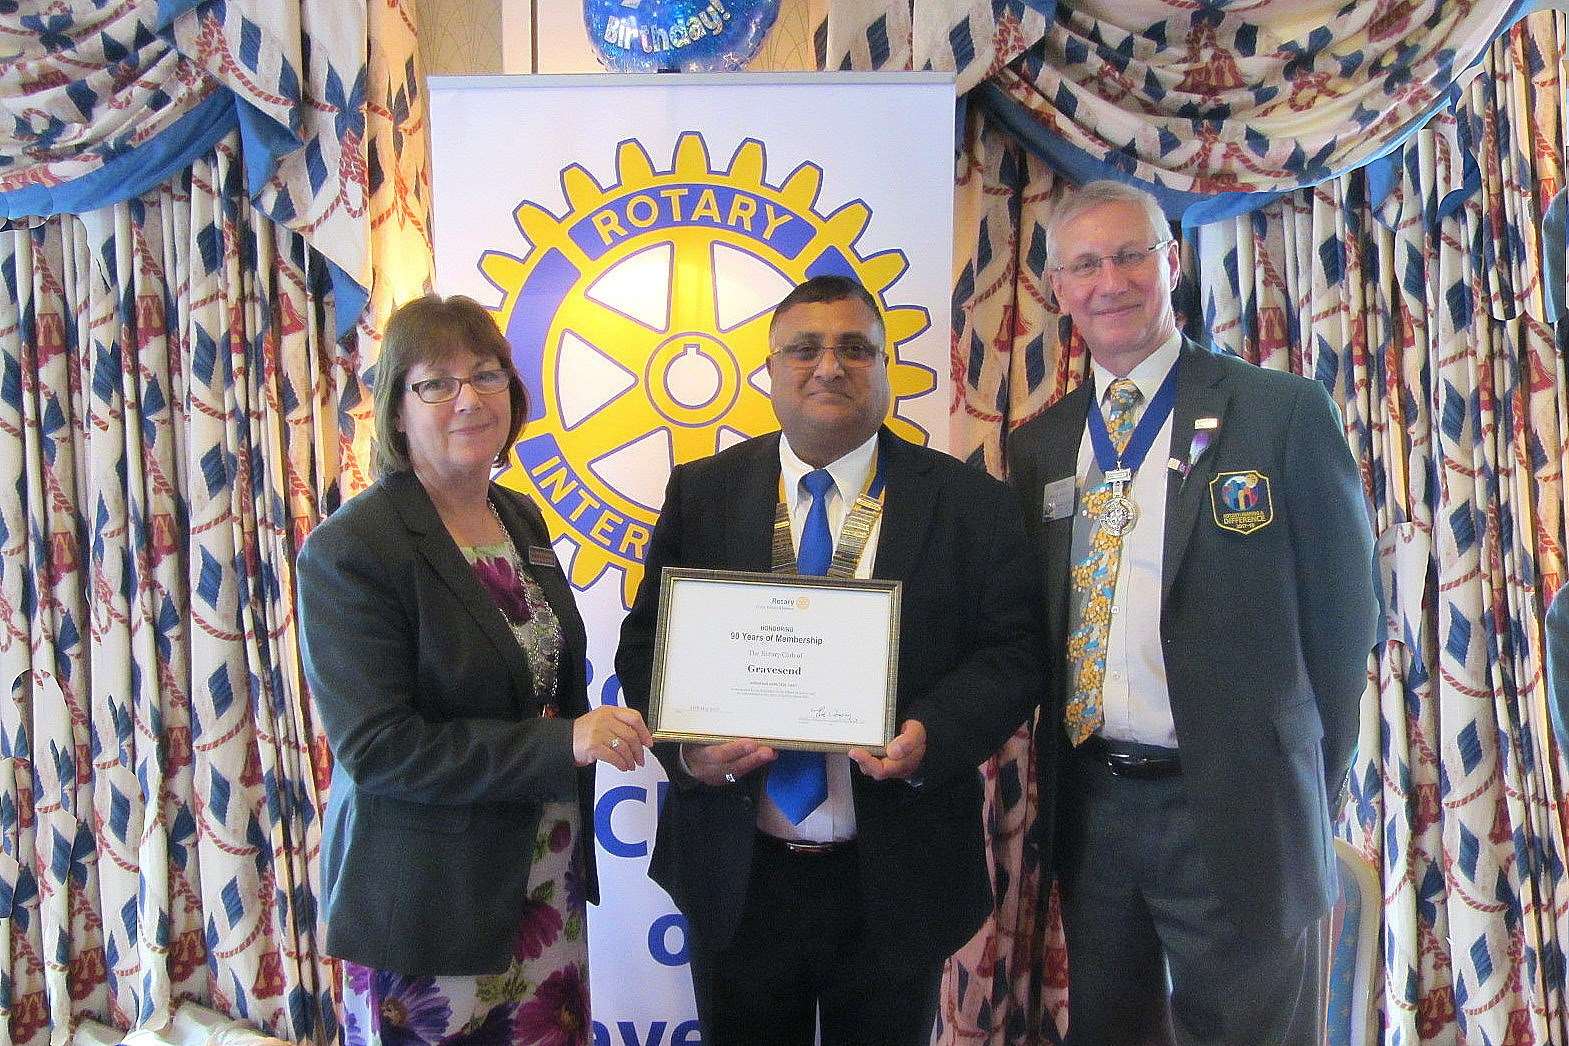 Gravesend Rotary club president Dilbagh Singh (centre) receives a commemorative certificate for the club's 90th birthday